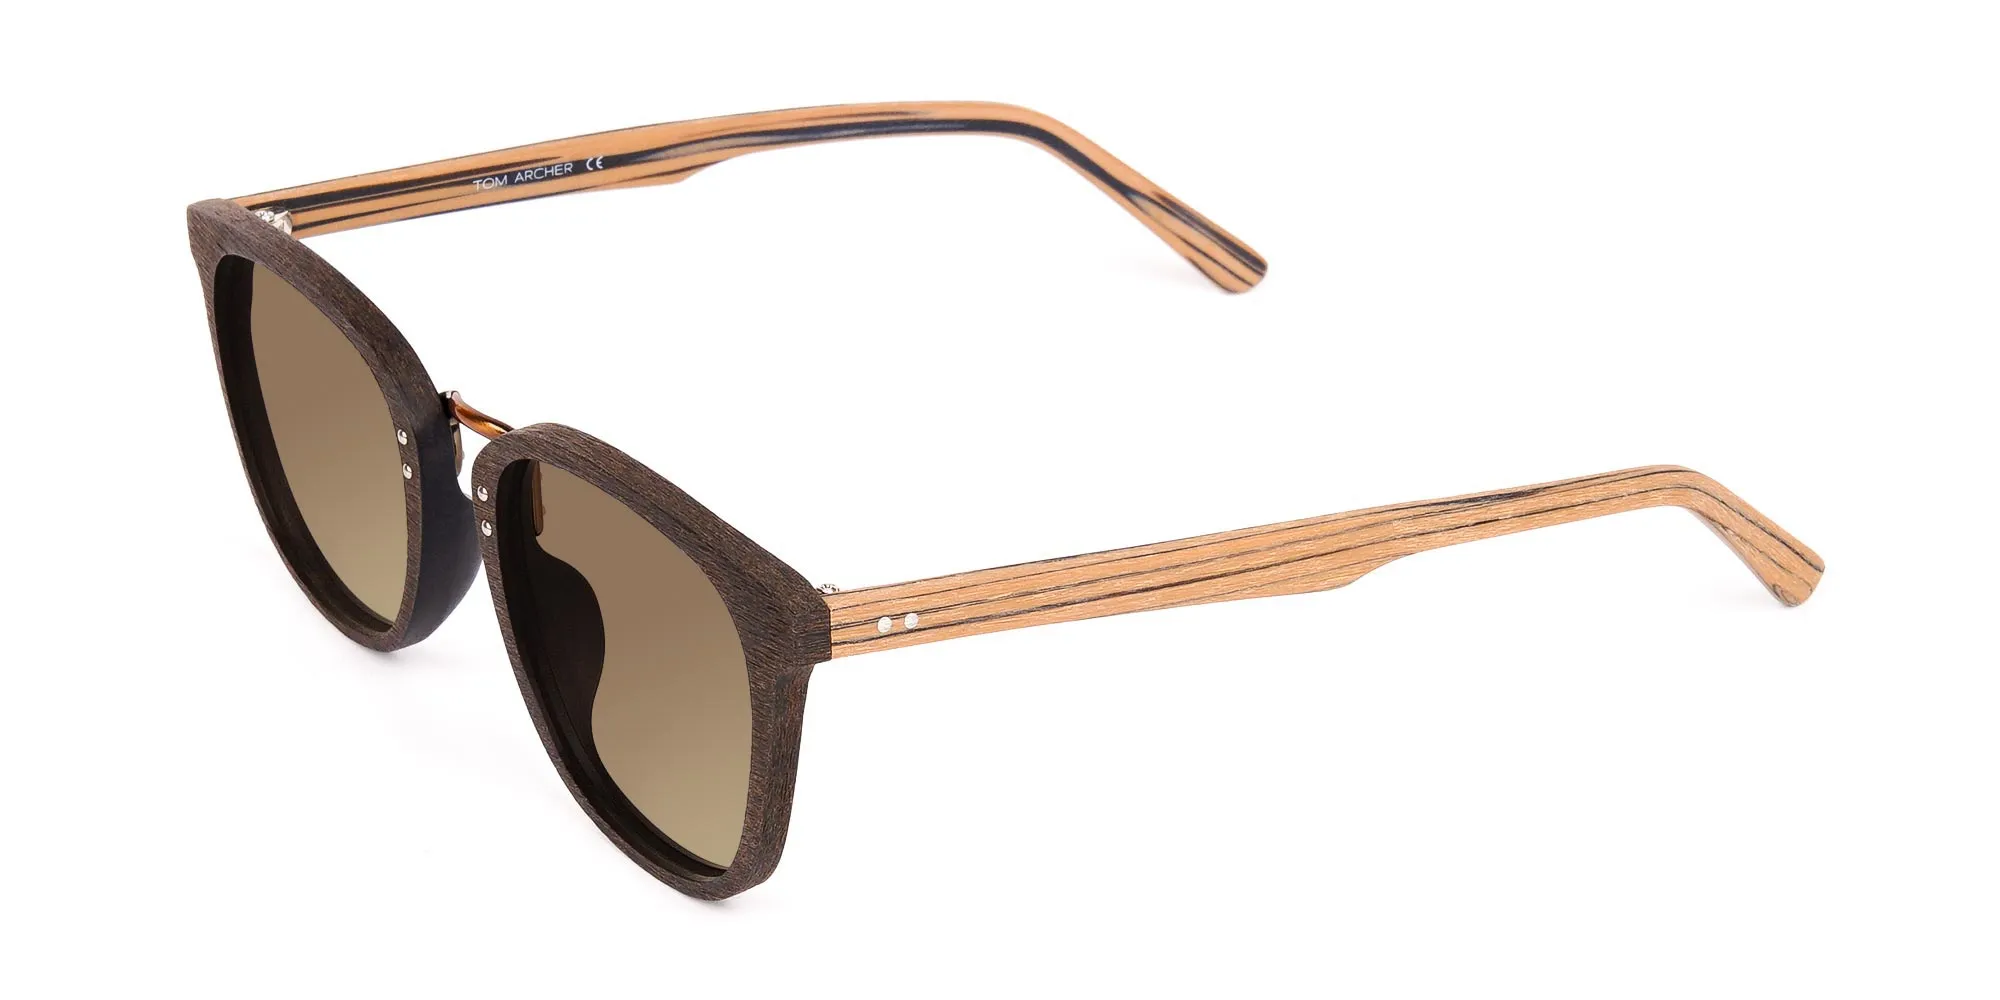 Wooden-Brown-Square-Sunglasses-with-Brown-Tint-2